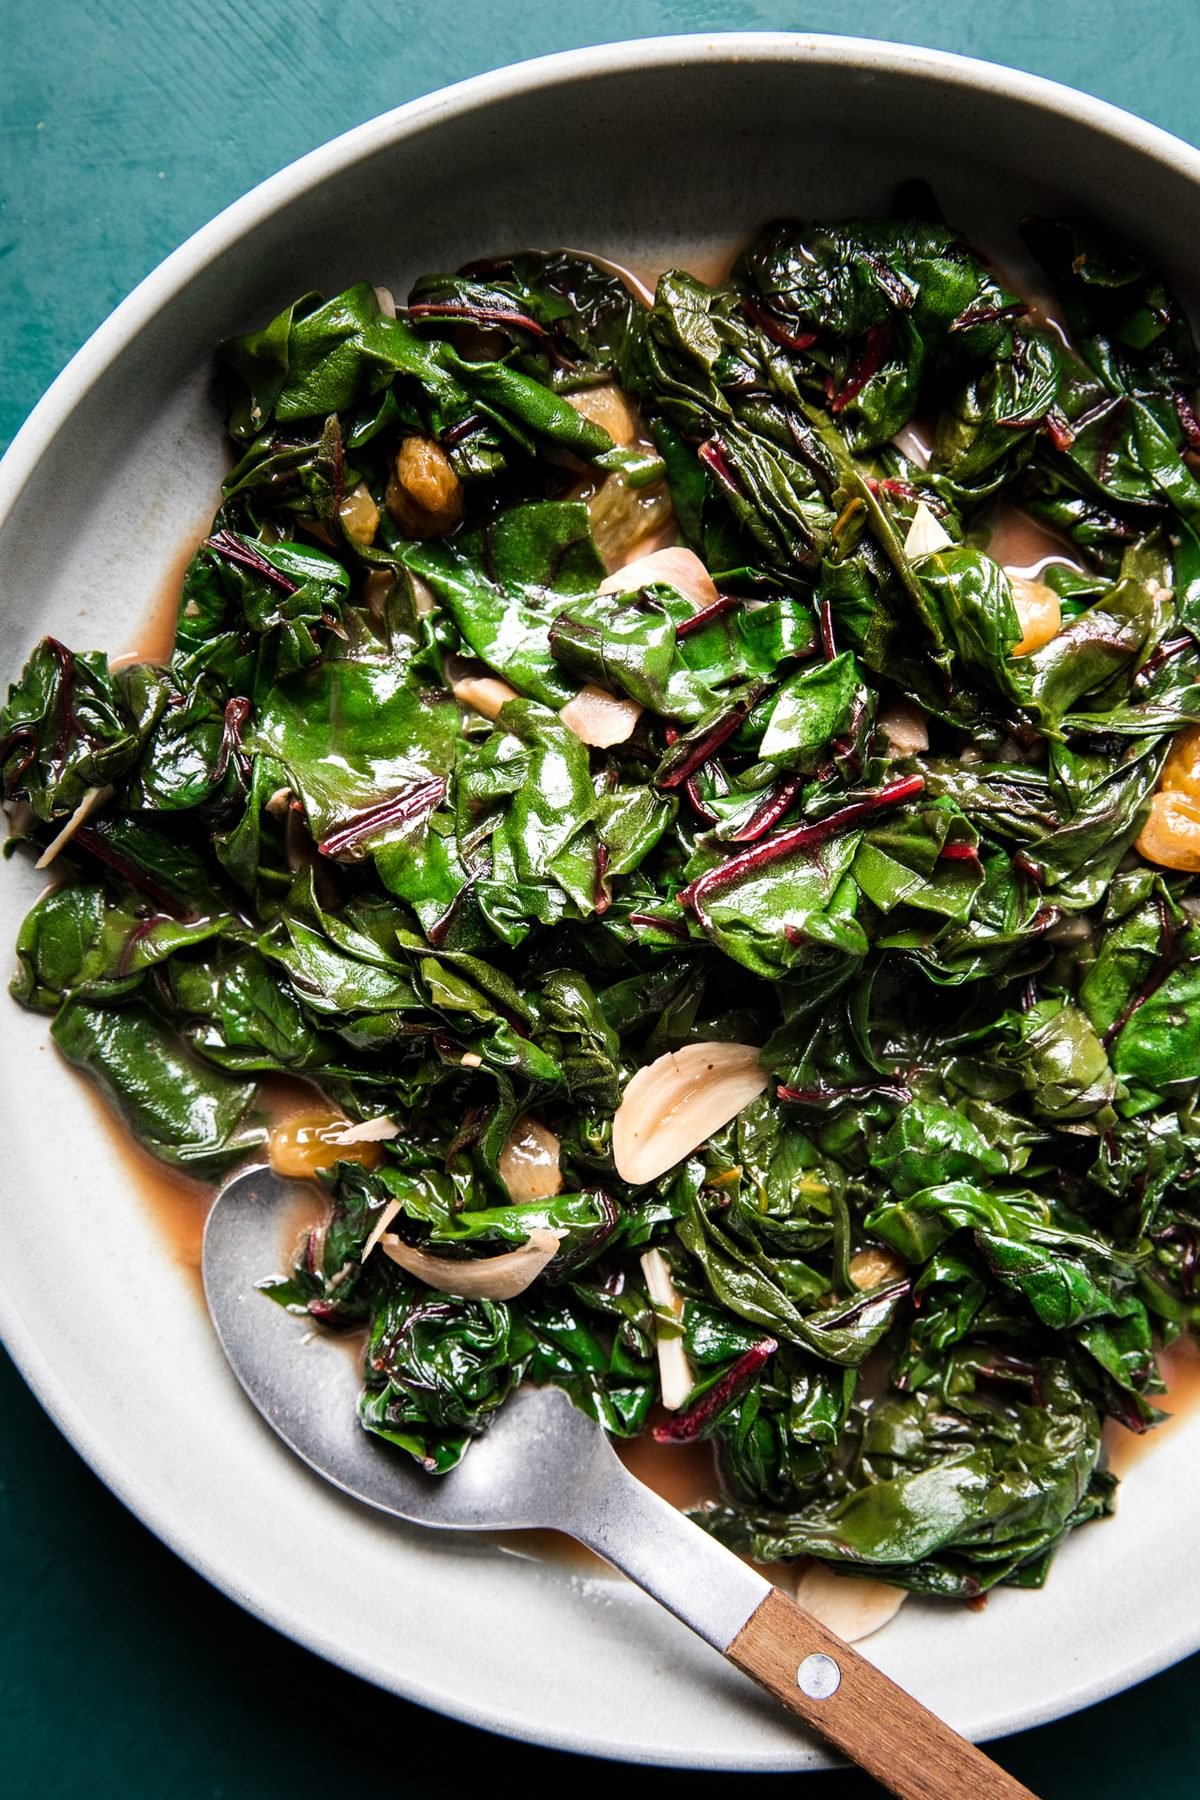 Braised Greens with Golden Raisins and Maple